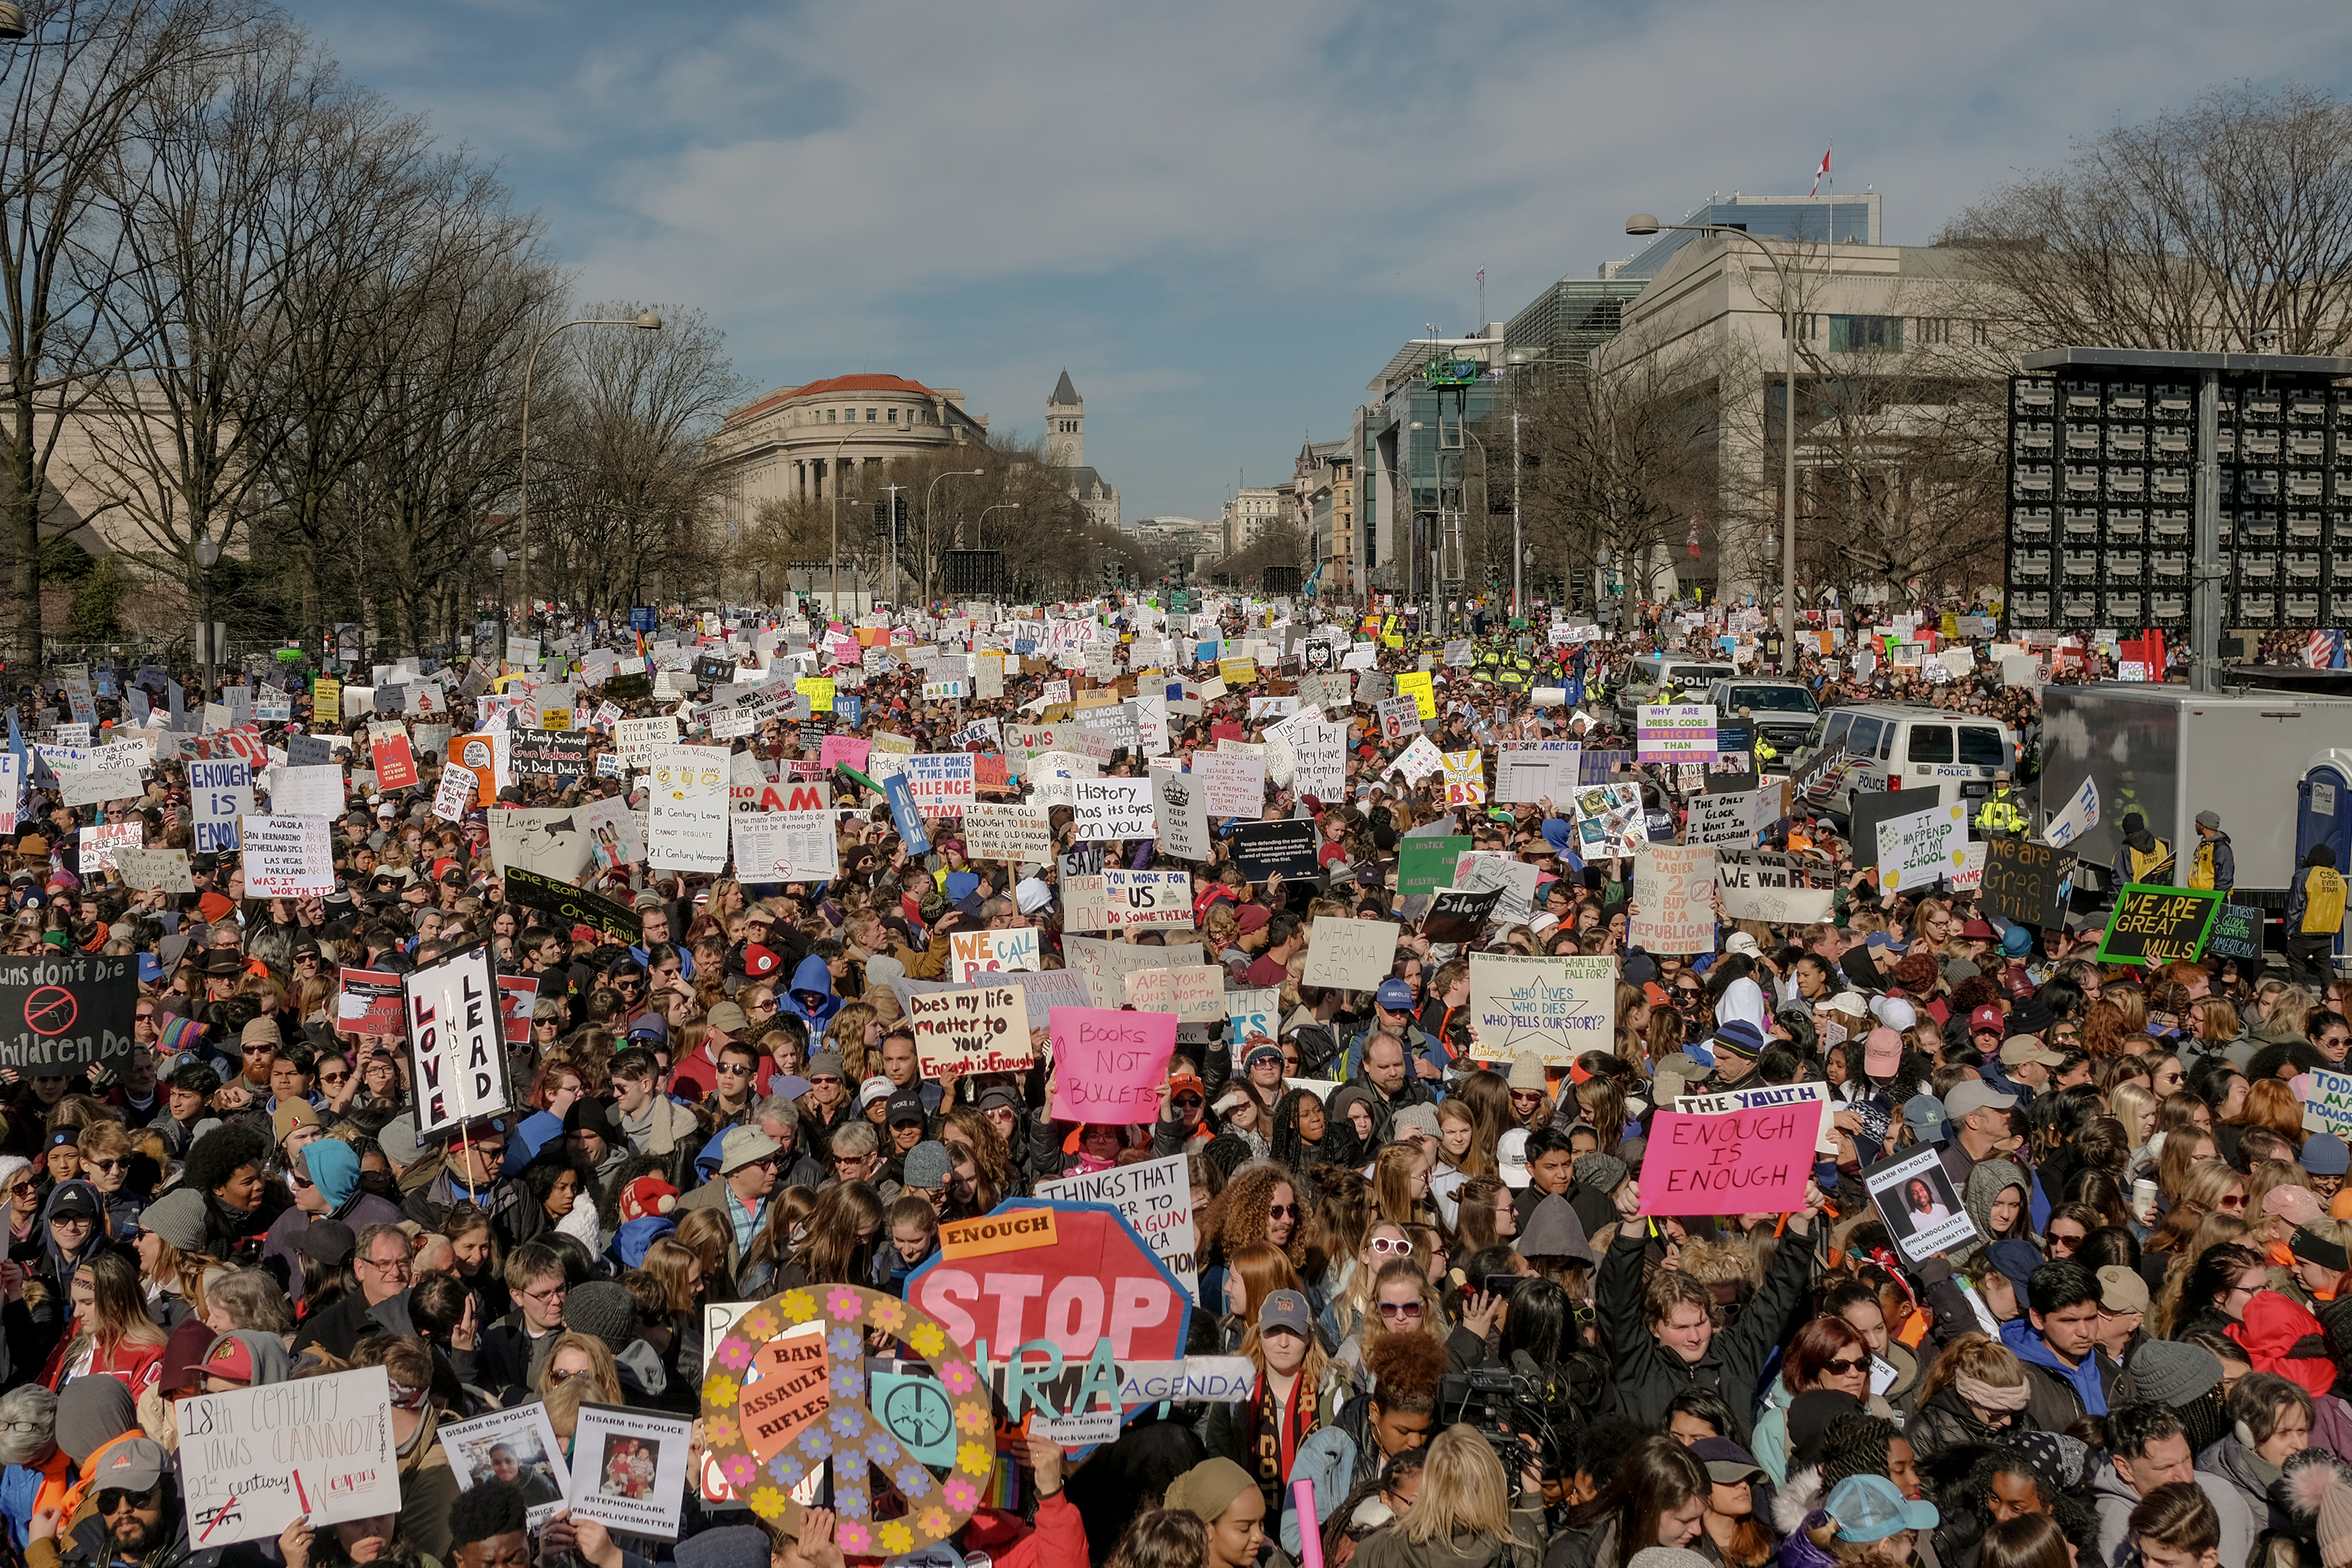 Demonstrators fill Pennsylvania Avenue as the March For Our Lives gets underway in Washington, D.C., on March 24, 2018. (Gabriella Demczuk for TIME)